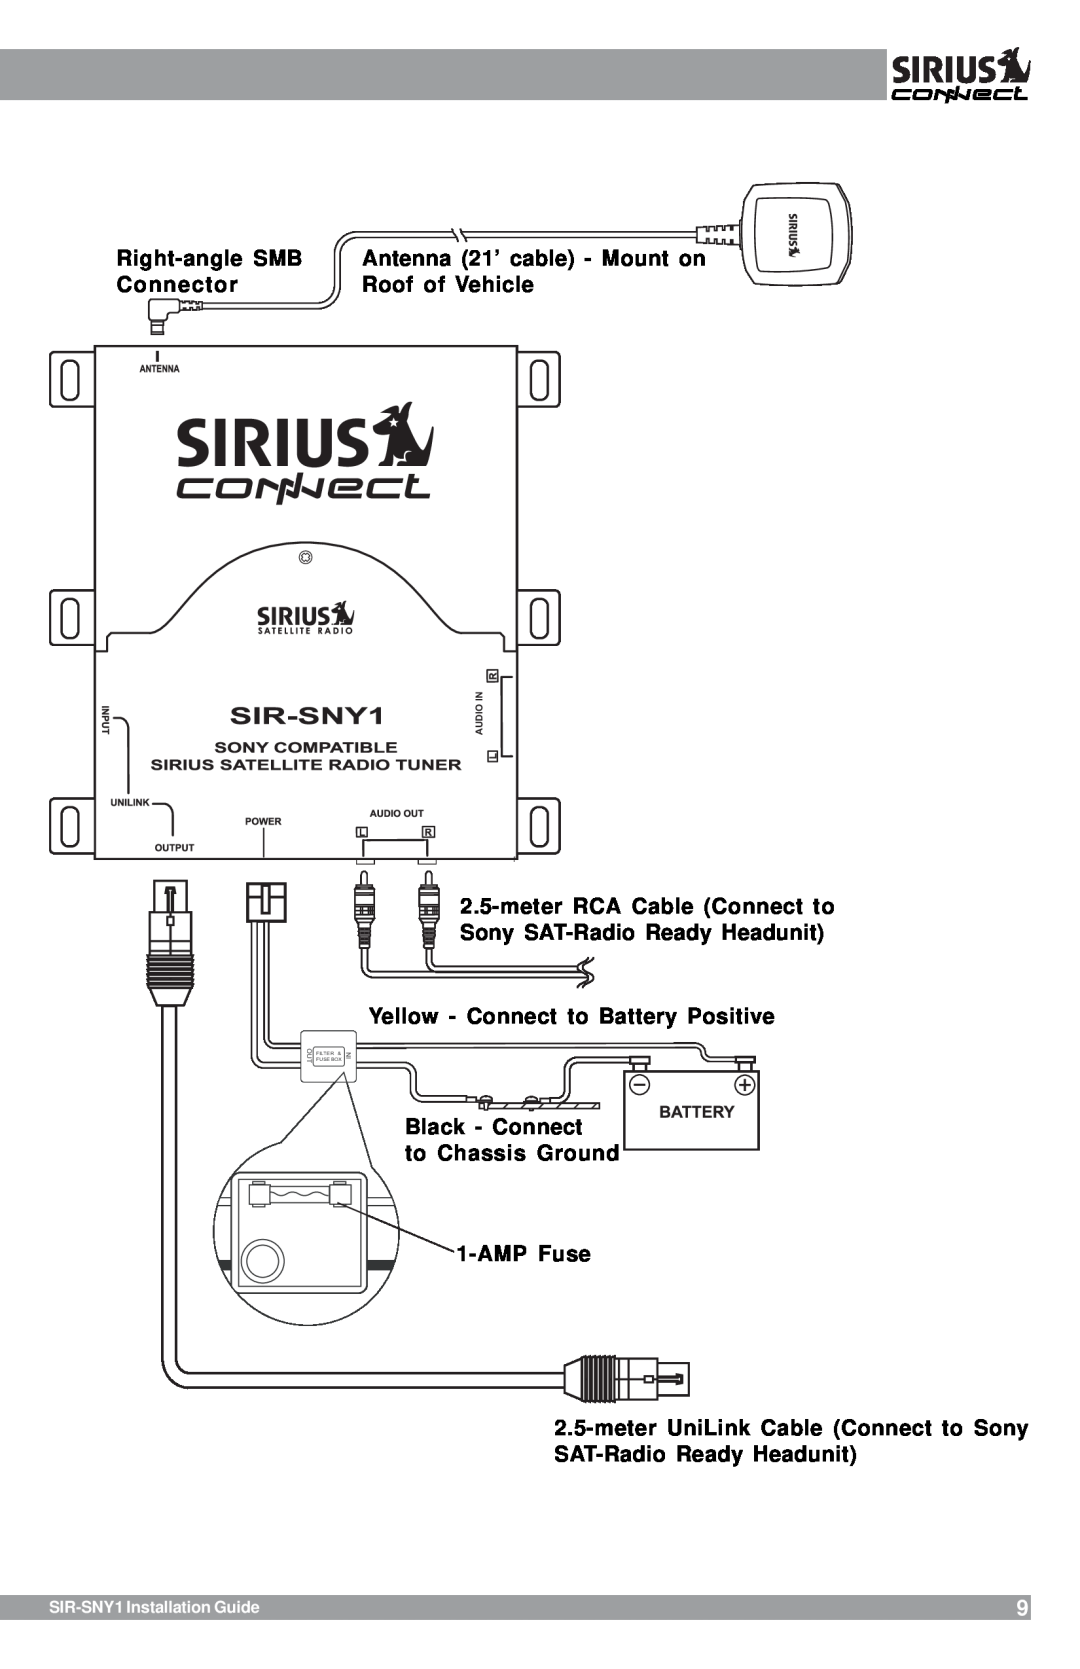 Sirius Satellite Radio SIR-SNY1 manual Right-angleSMB, Antenna 21’ cable - Mount on, Connector, Roof of Vehicle, Audi 